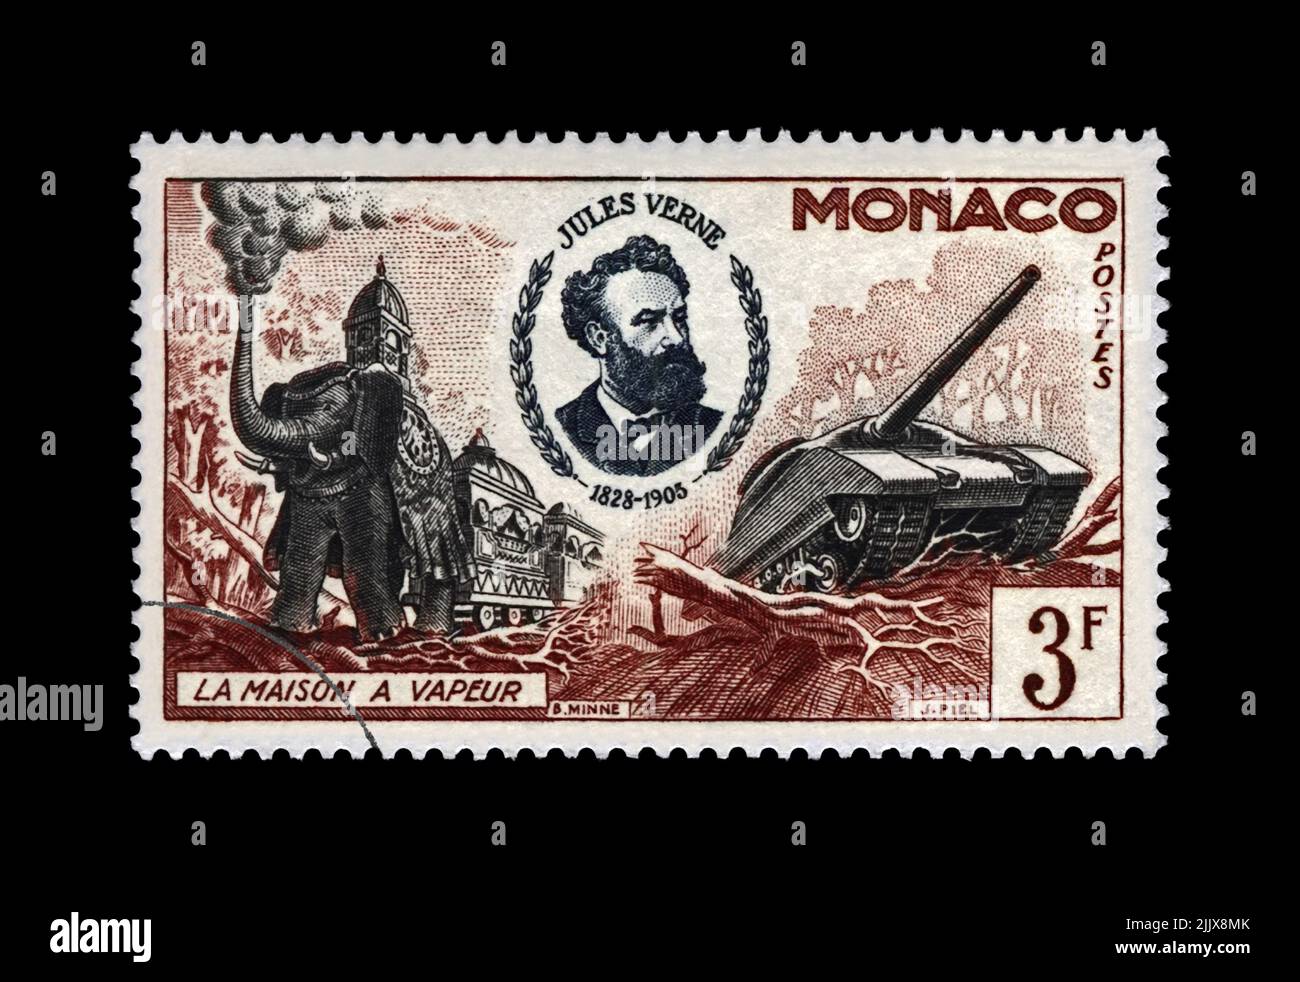 Jules Verne (1828-1905), famous science writer and steam house, military machines, circa 1955. canceled postal stamp printed in Monaco isolated Stock Photo